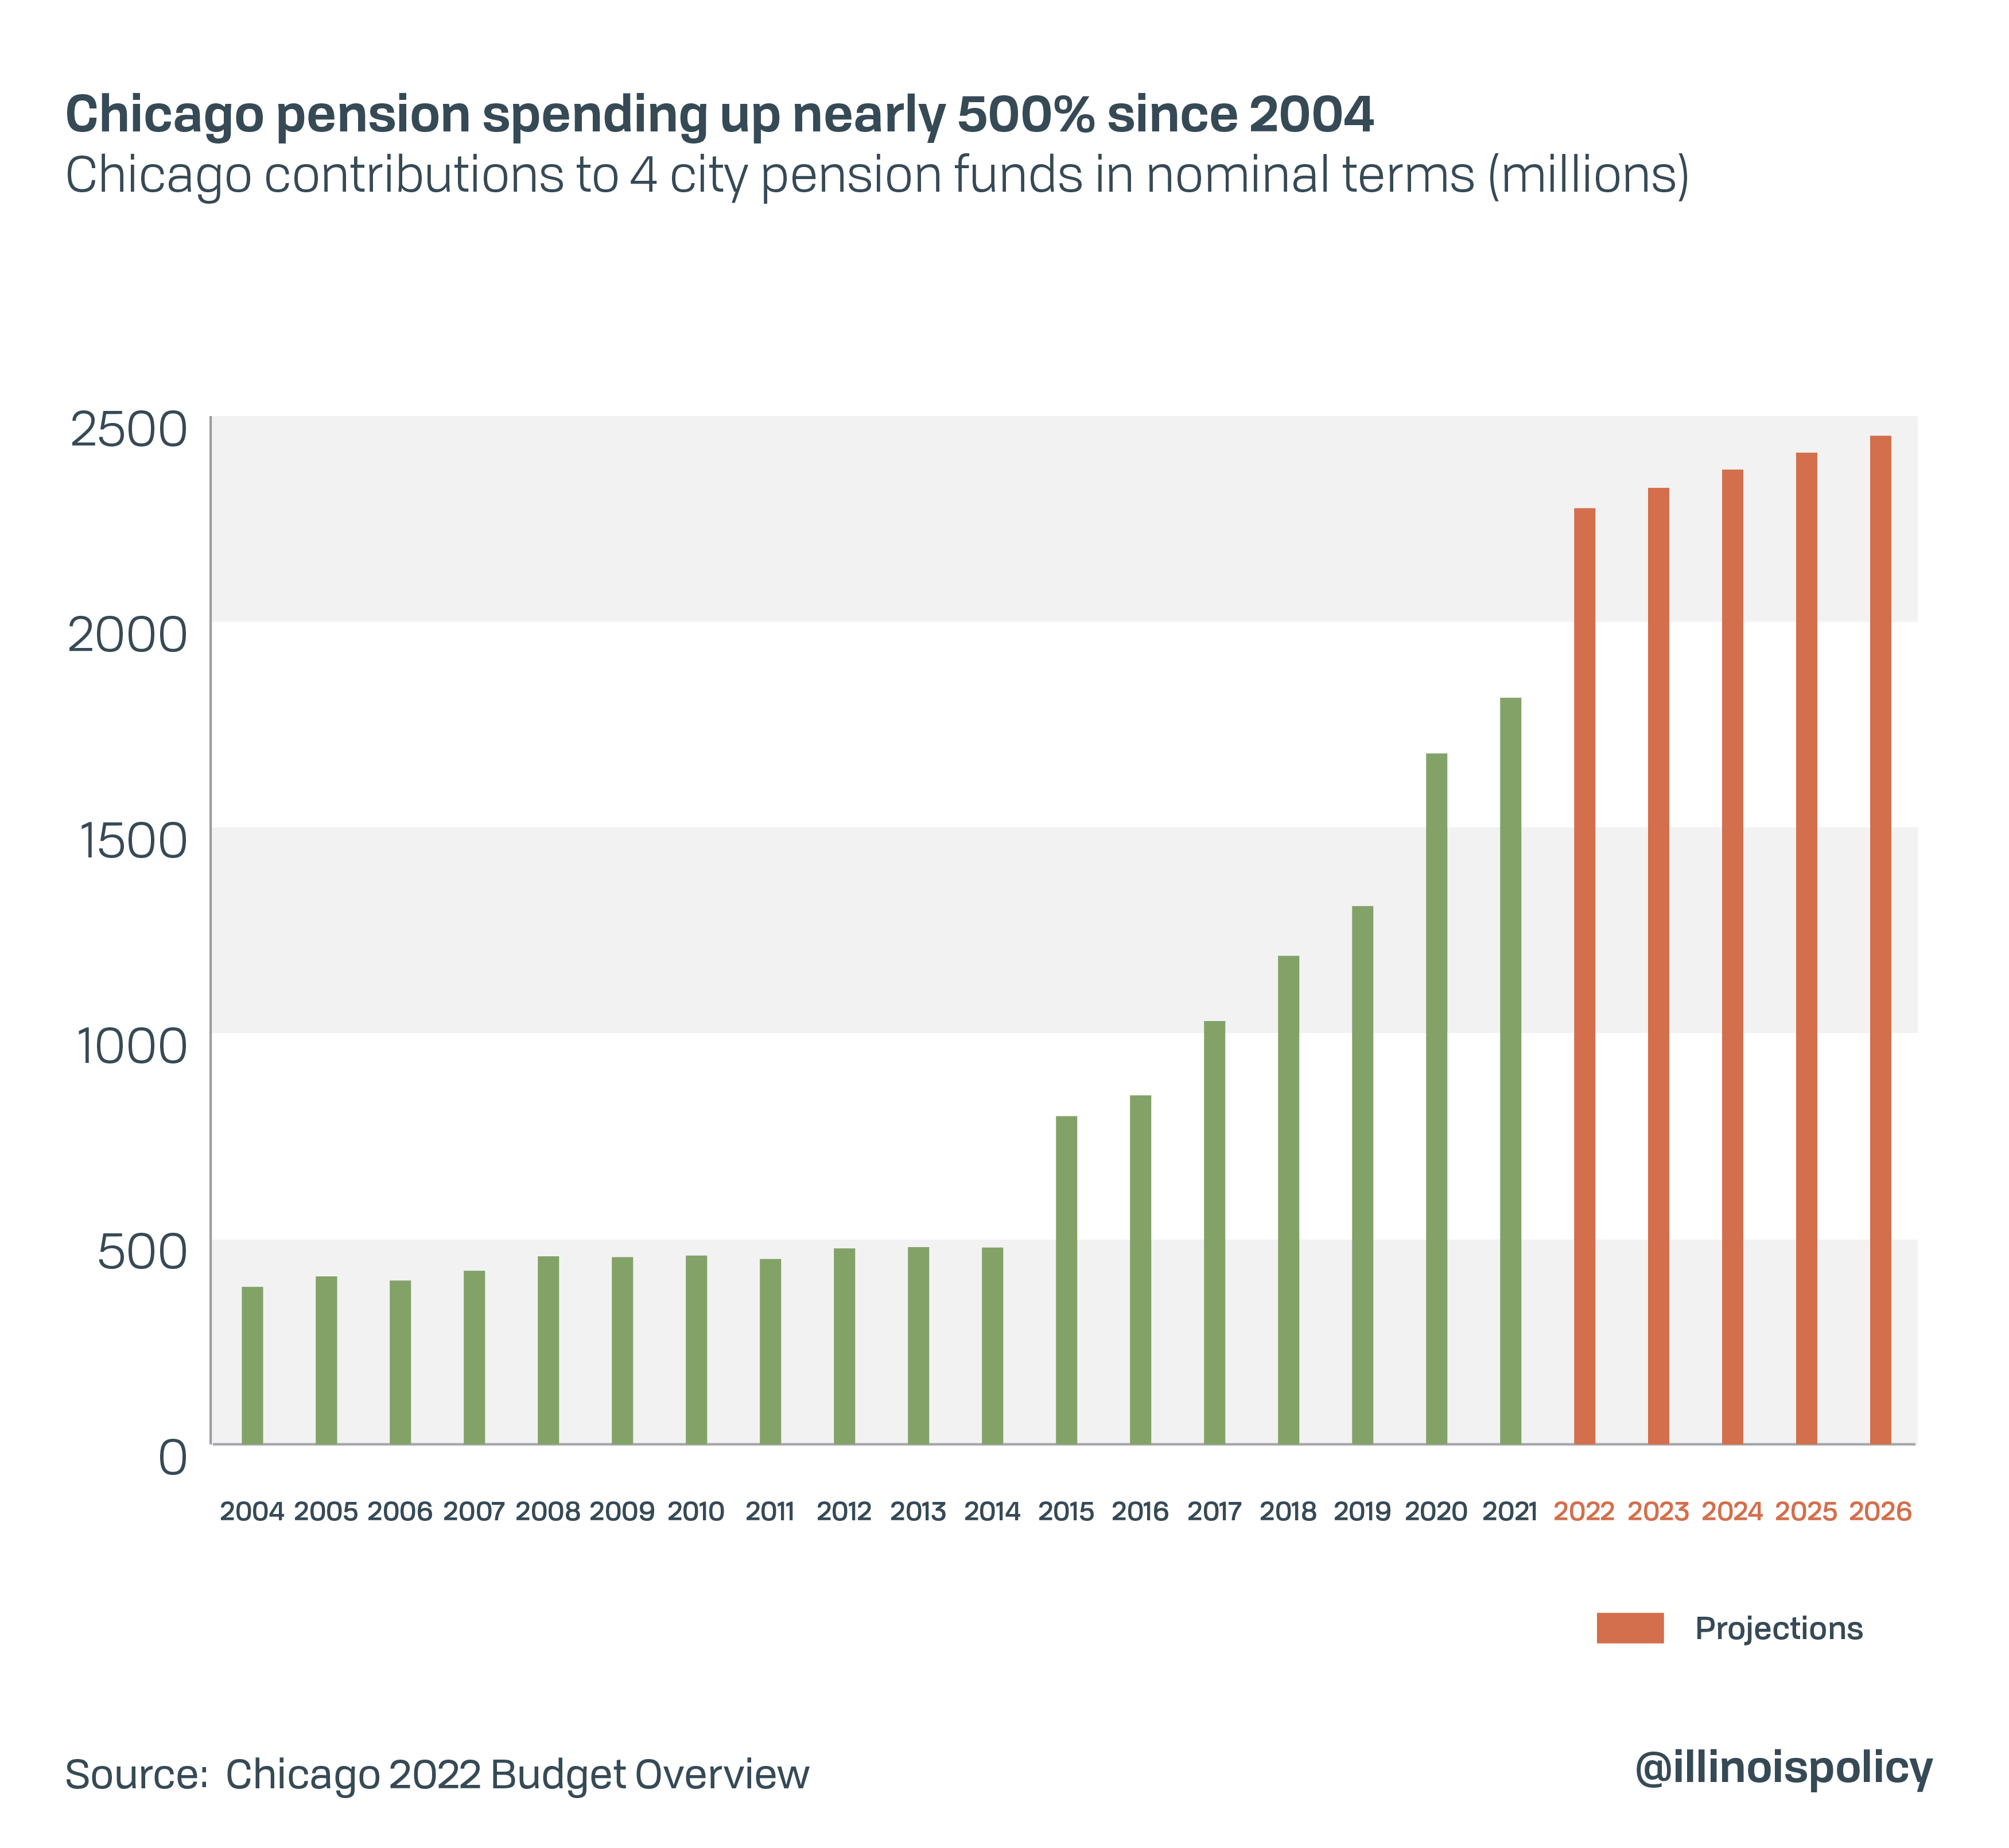 Chicago pension spending up nearly 500% since 2004